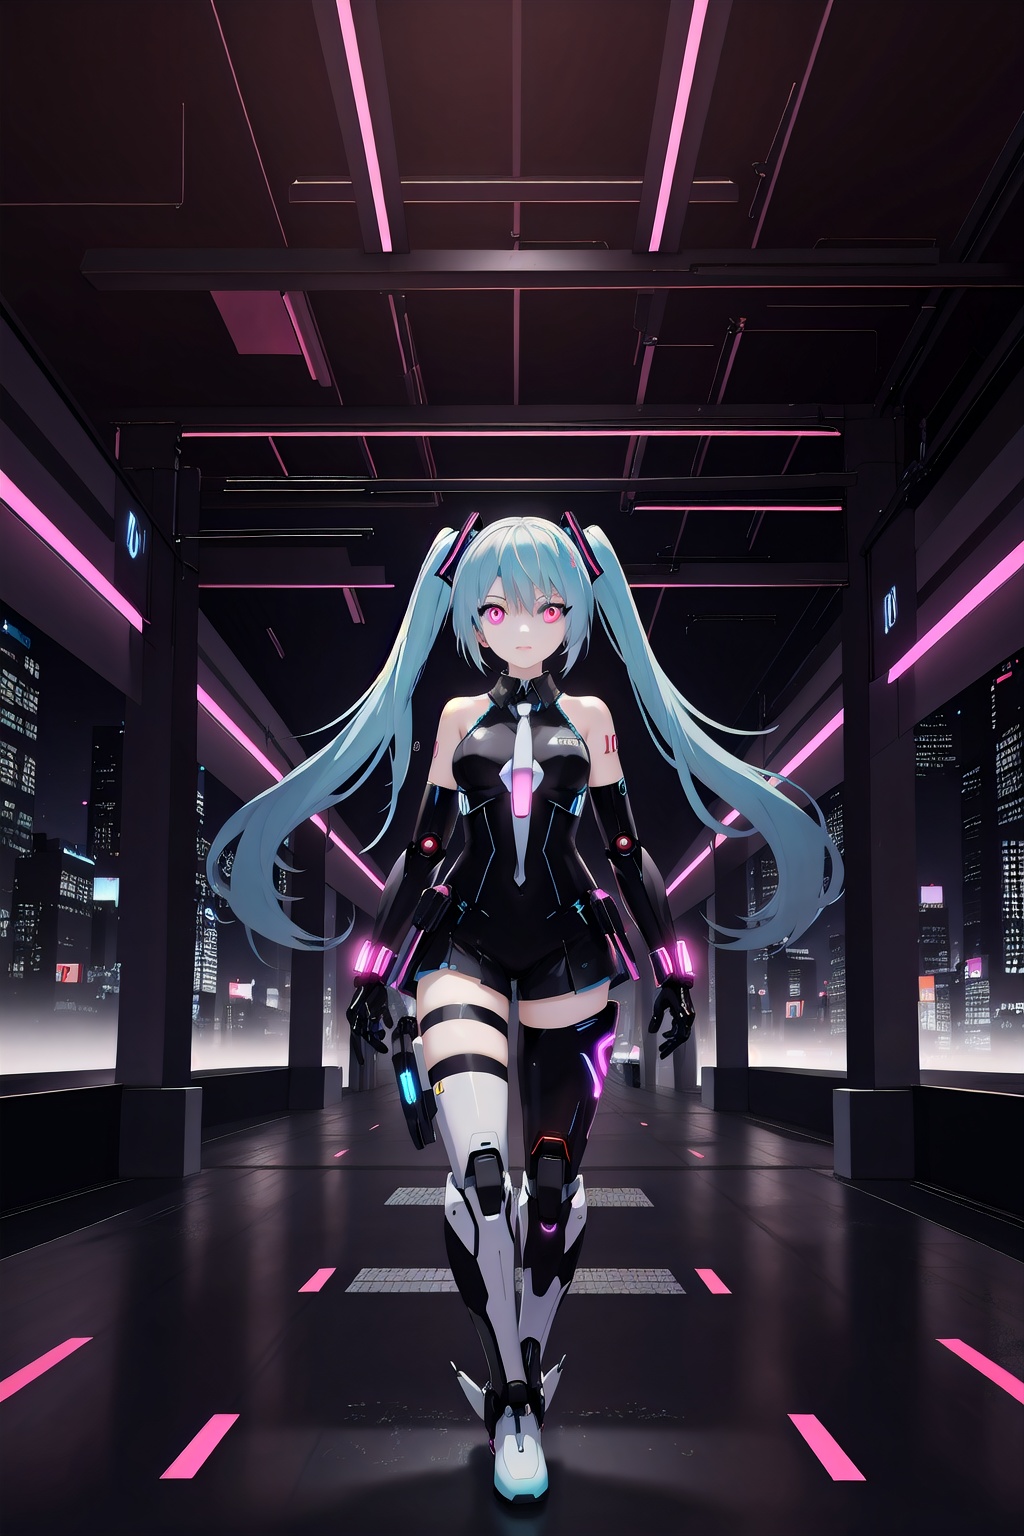 futuristic-style Hatsune Miku, cyberpunk elements, neon lights, holographic accessories, digital environment, advanced technology, robotic aesthetics, anime character, colorful hair, dynamic pose, urban backdrop, glowing eyes, virtual idol, high-tech fashion, immersive atmosphere, vibrant colors, future city skyline, cutting-edge design, stylish outfit, hologram effects, digital art, sci-fi elements, energetic vibe, youth culture, modern anime style, holographic display, illuminated cityscape, night scene, advanced gadgets, cool attitude, , masterpiece, best quality